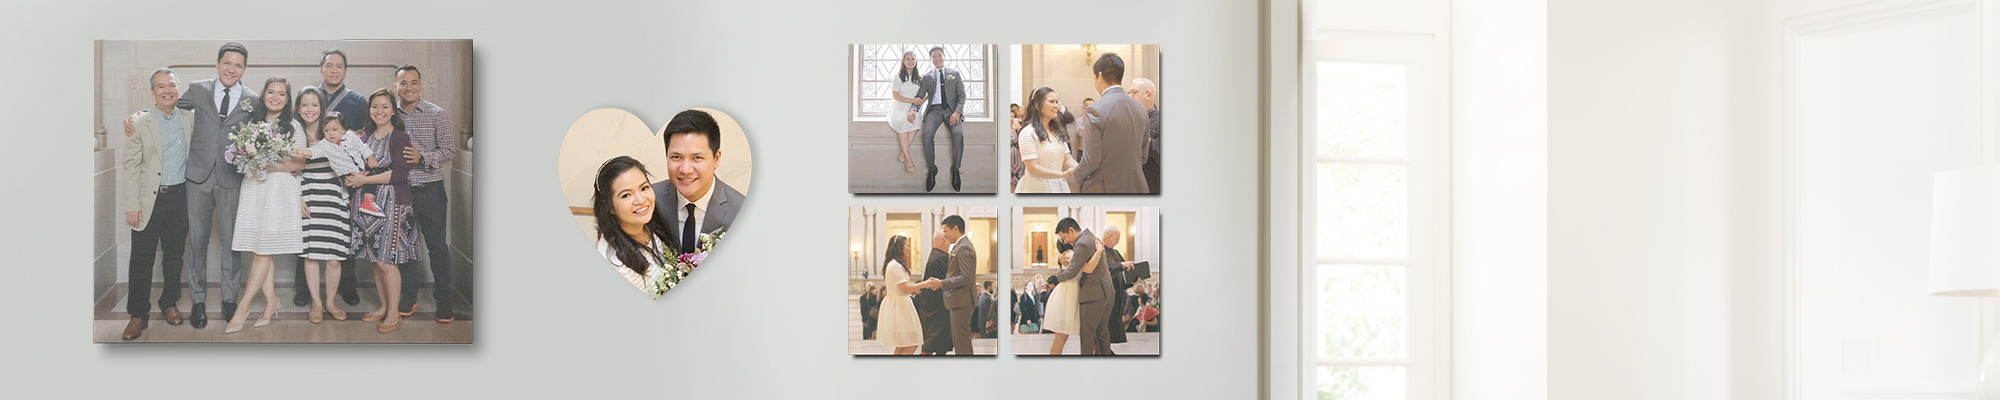 Wedding Photo Cards + Gifts  